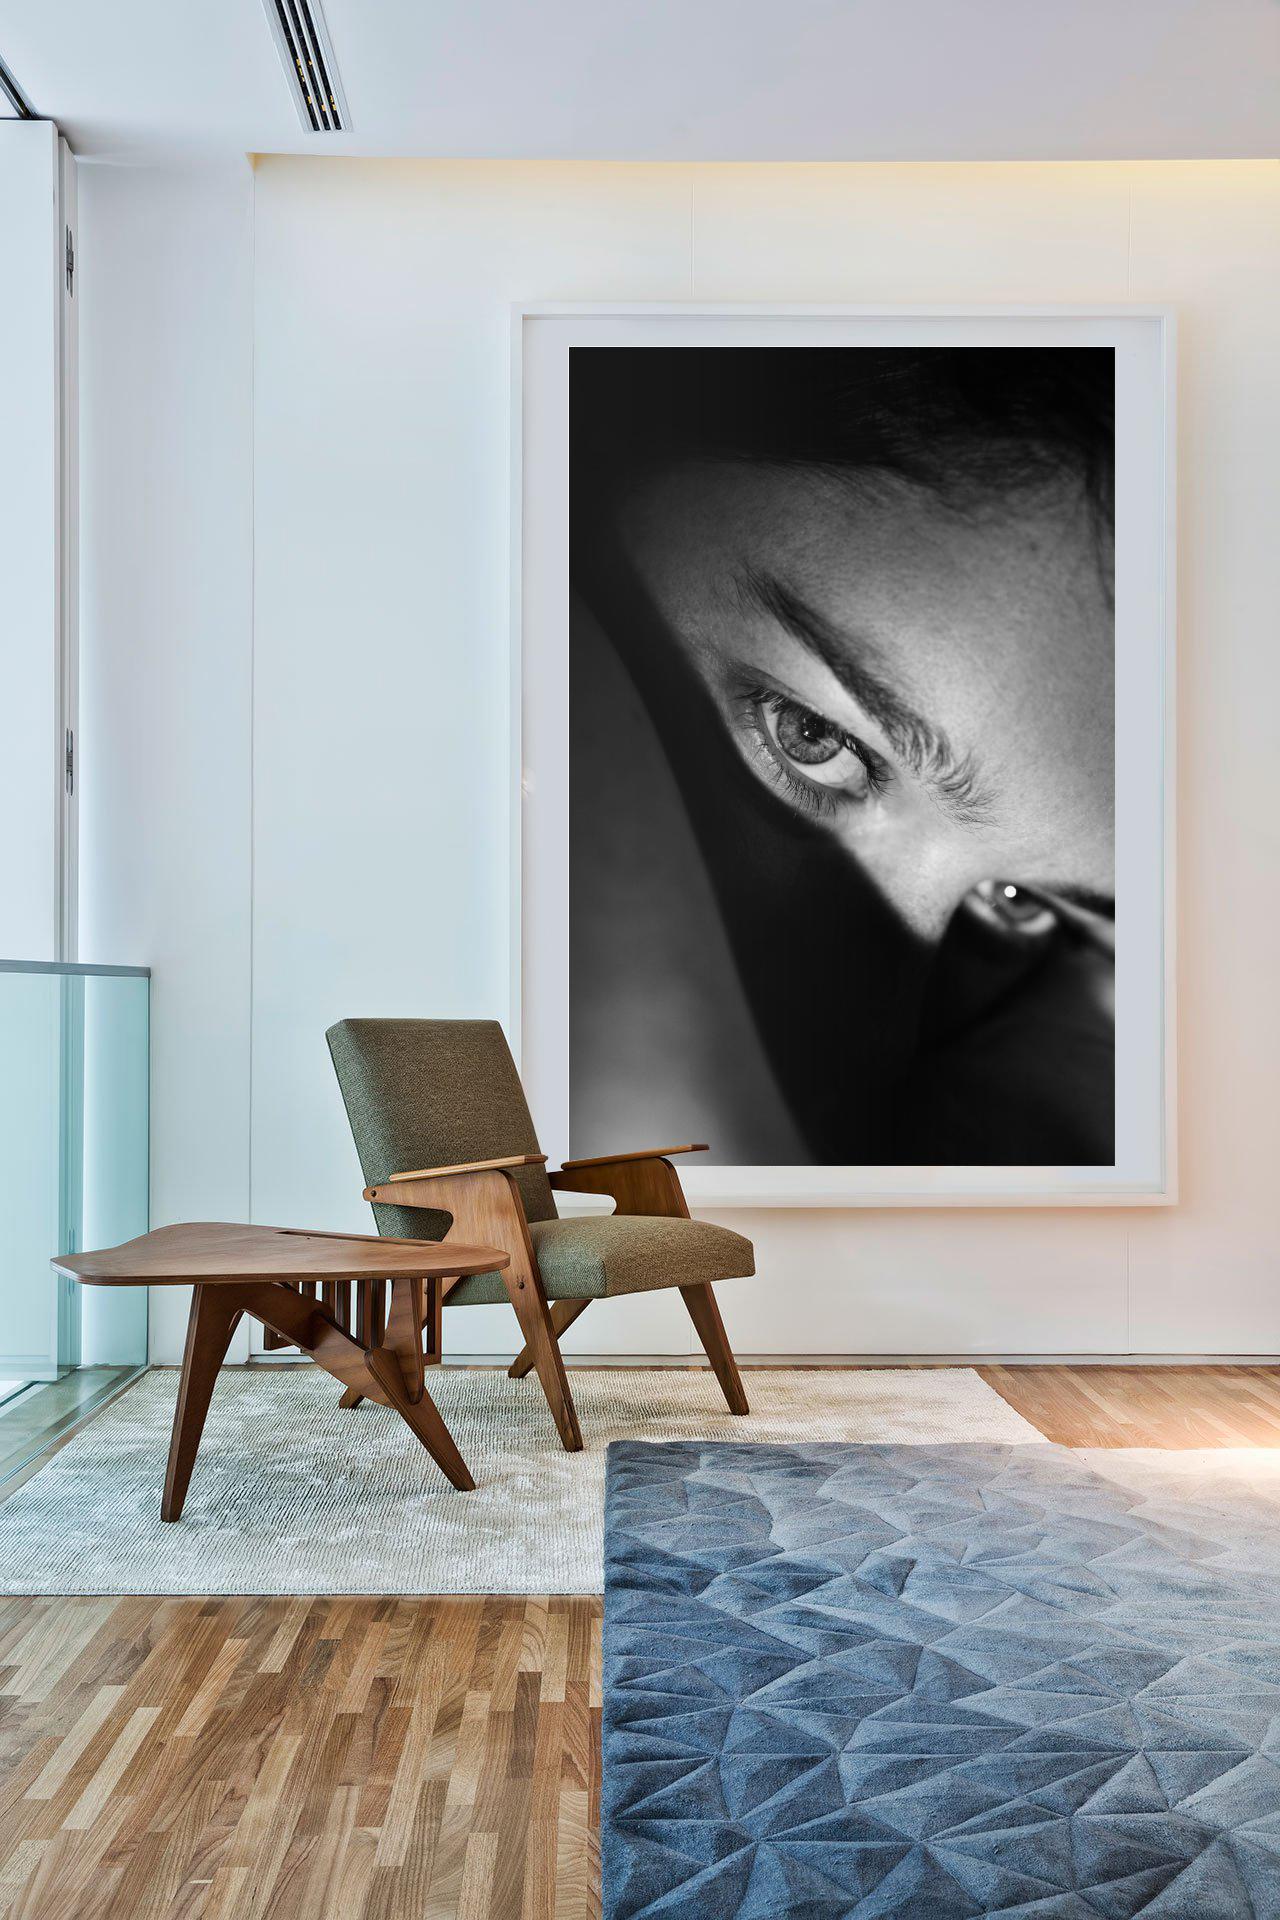 Black and white original photography by Cyrille Druart. 
Edition: I/V
Dimensions:  120 x 90 cm
Signed and numbered


Cyrille Druart is a French photograph and architect, a book about his new series will be published soon. He is supported by famous